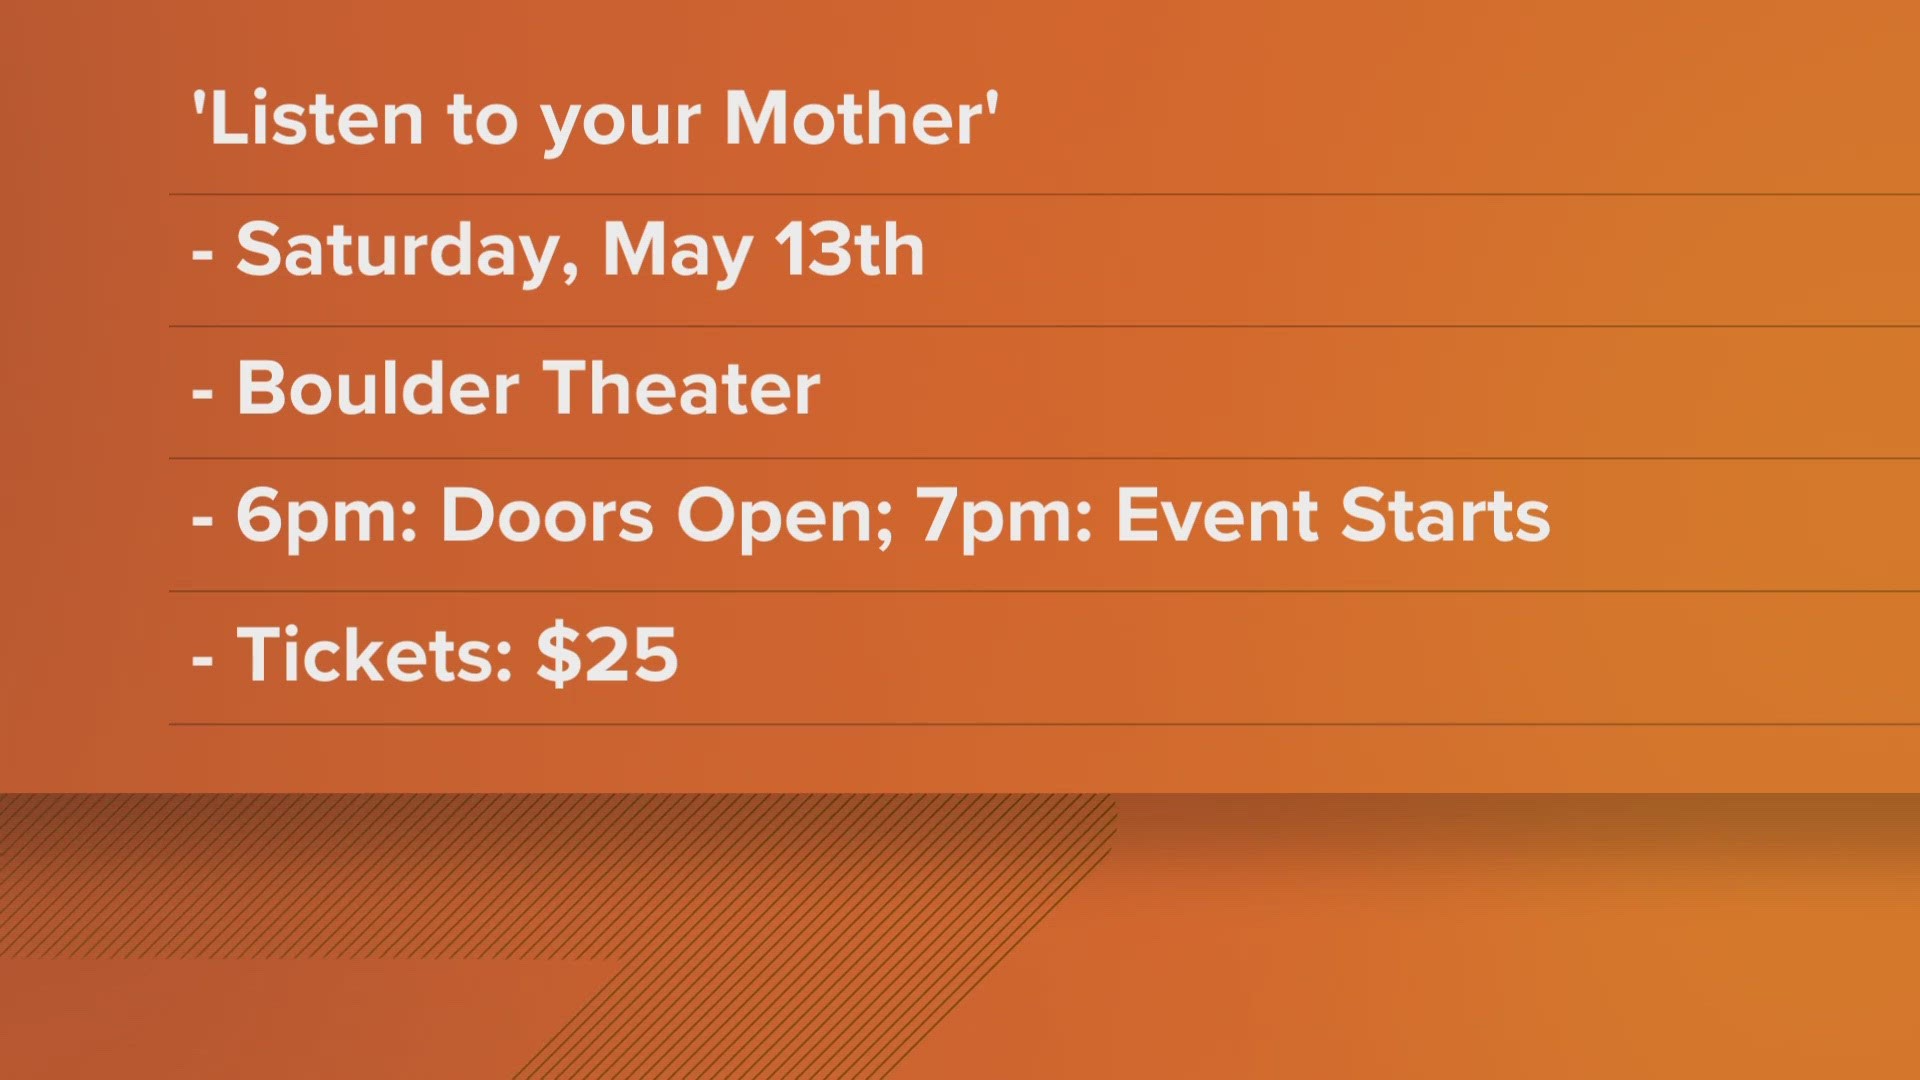 Saturday, May 13, a group of mothers from Colorado will be sharing their stories at the Boulder Theater at 7 p.m.